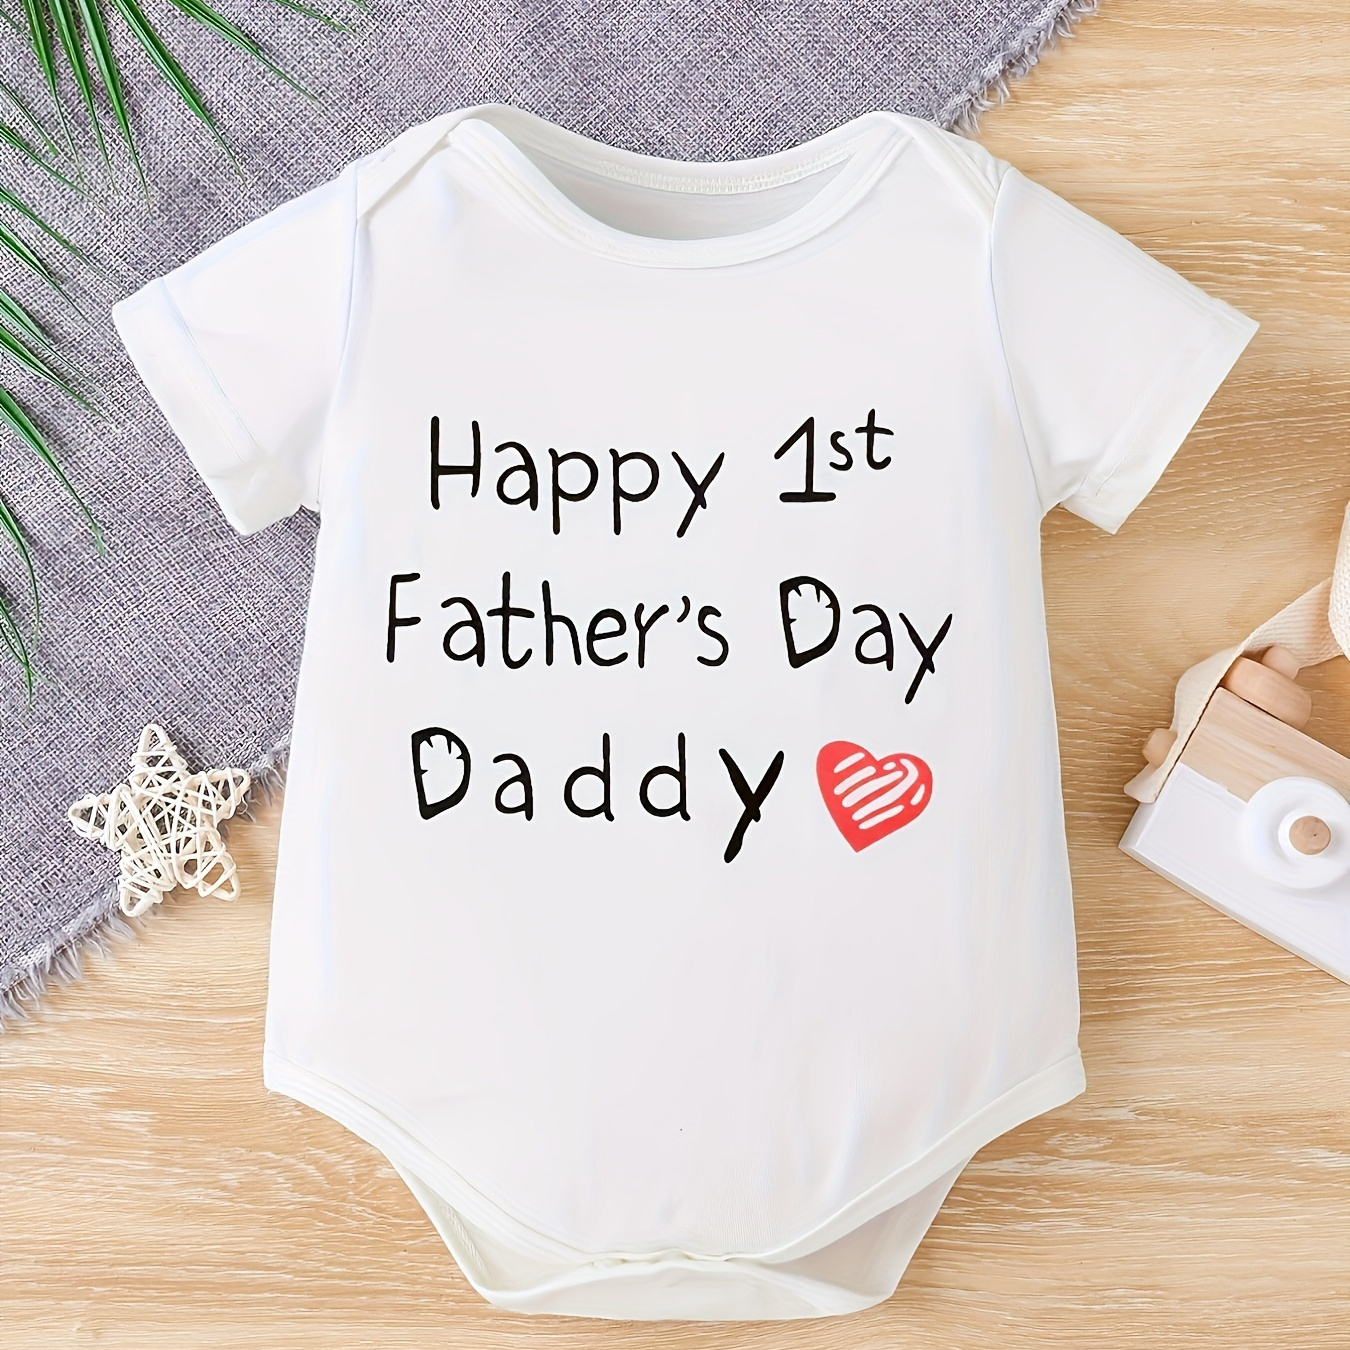 

Infant's "happy 1st Father's Day Daddy" Print Bodysuit, Casual Short Sleeve Onesie, Baby Boy's Clothing